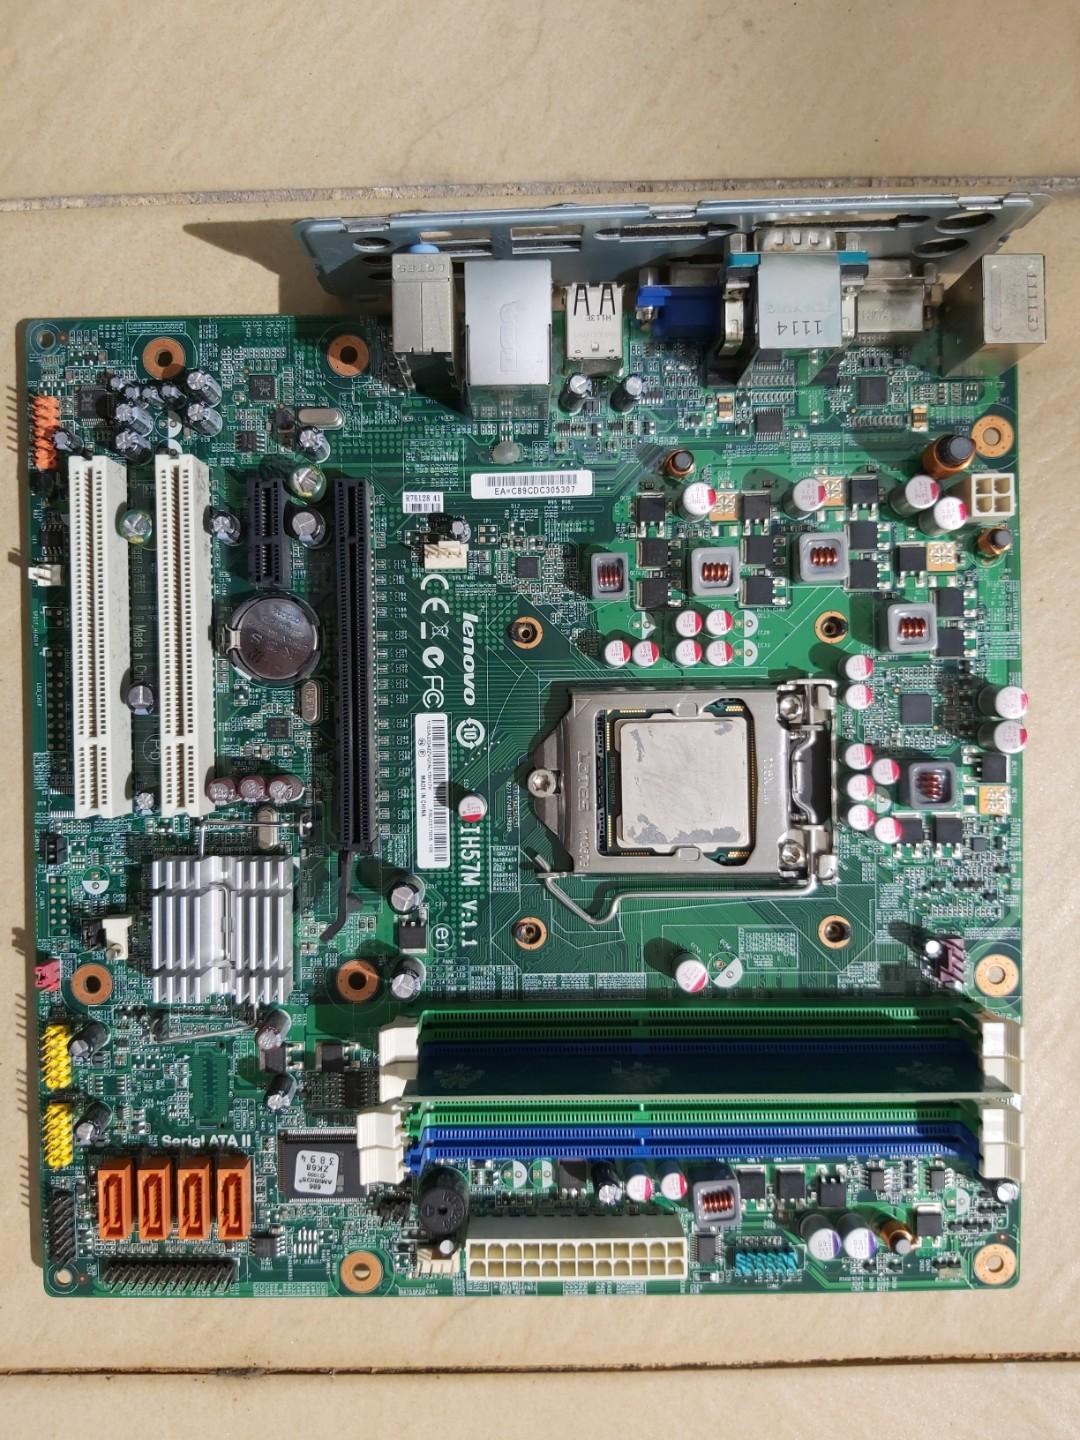 Lenovo Ih57m V1 1 Motherboard With Intel Core I5 660 Chipset Electronics Computer Parts Accessories On Carousell